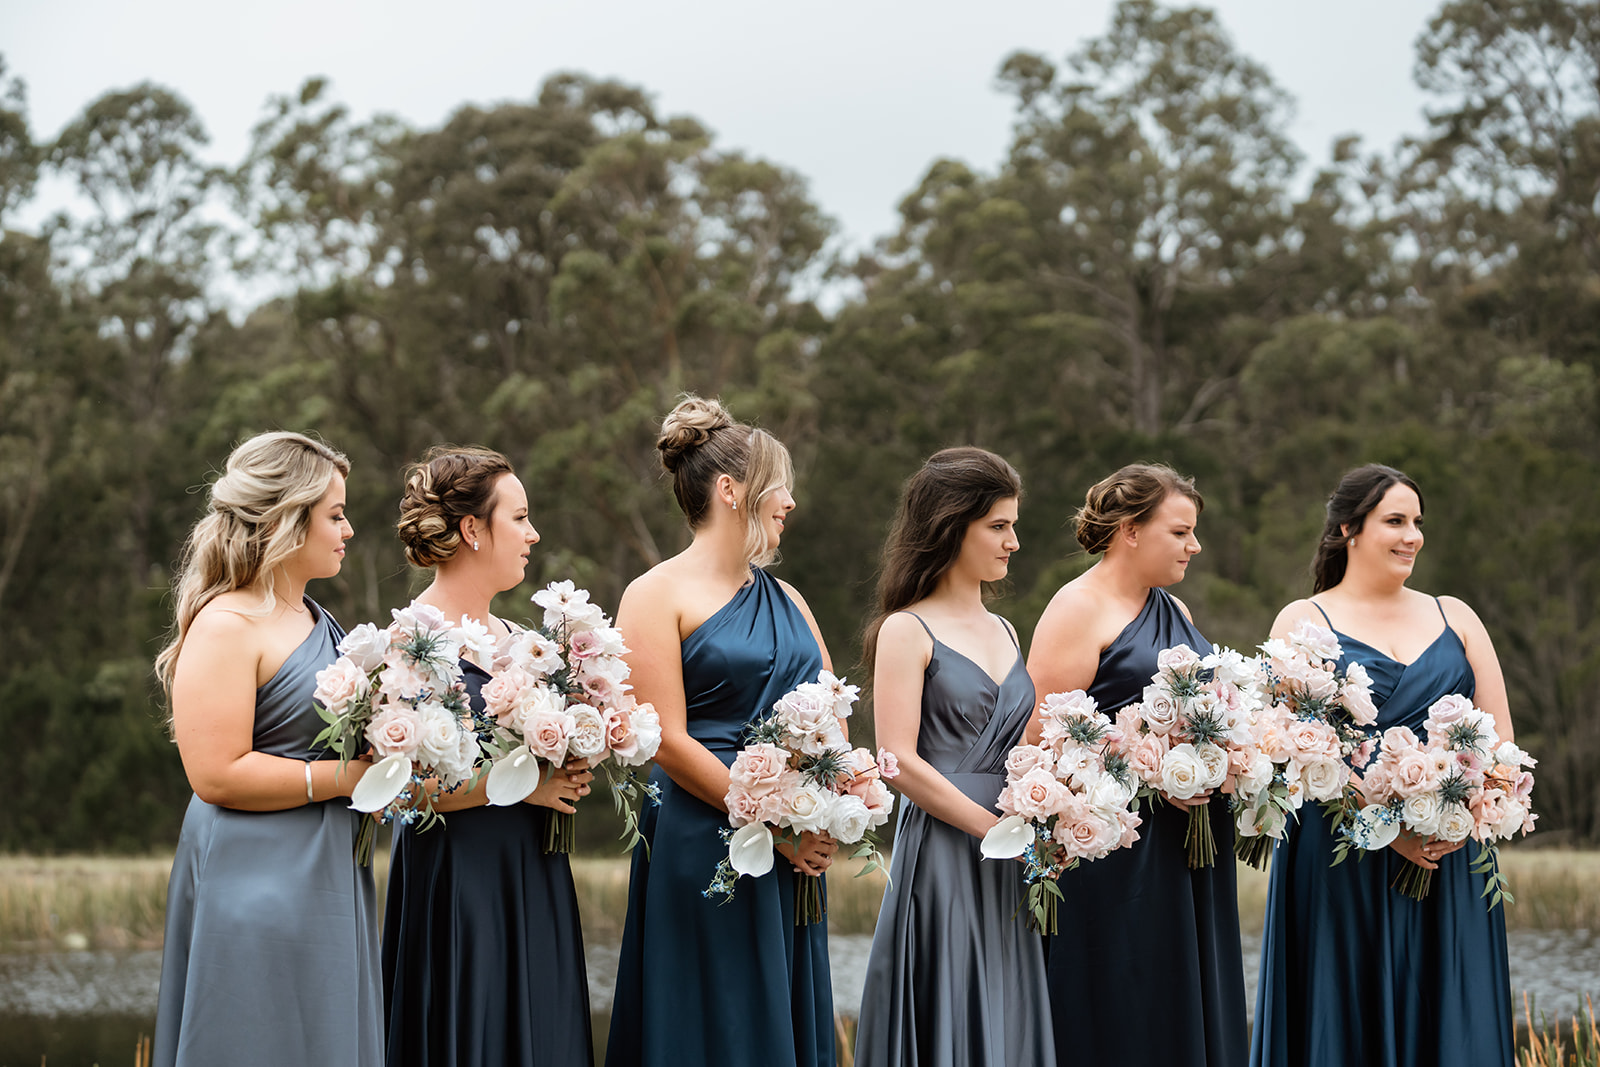 Bridesmaids in different shades of navy blue